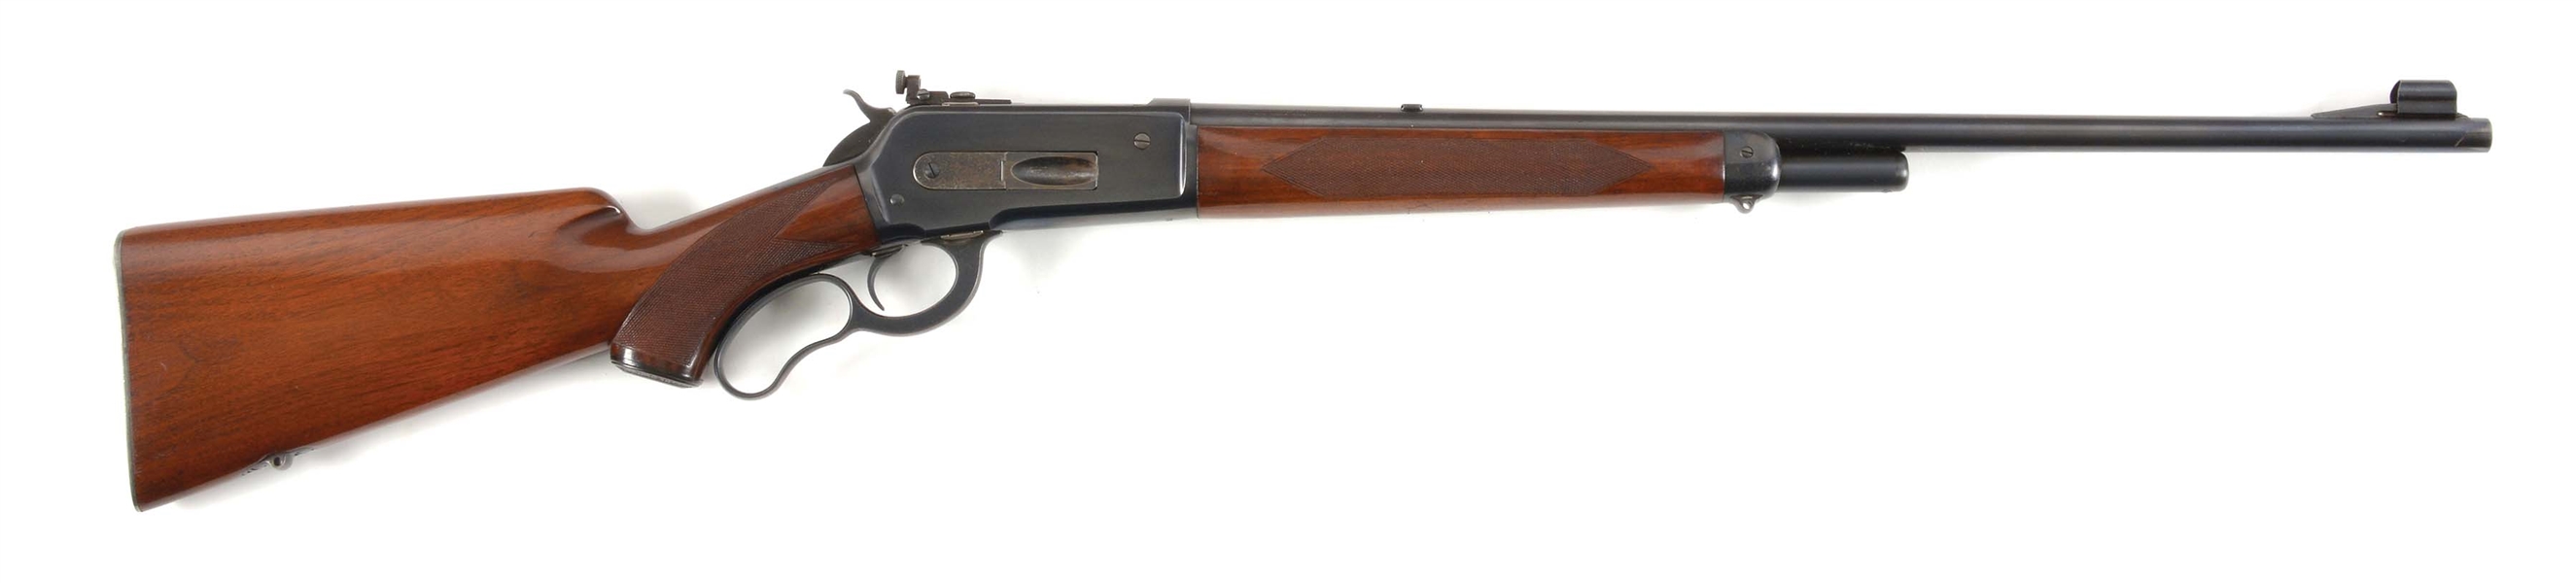 (C) HIGH CONDITION PRE-WAR WINCHESTER 71 DELUXE LEVER ACTION RIFLE.